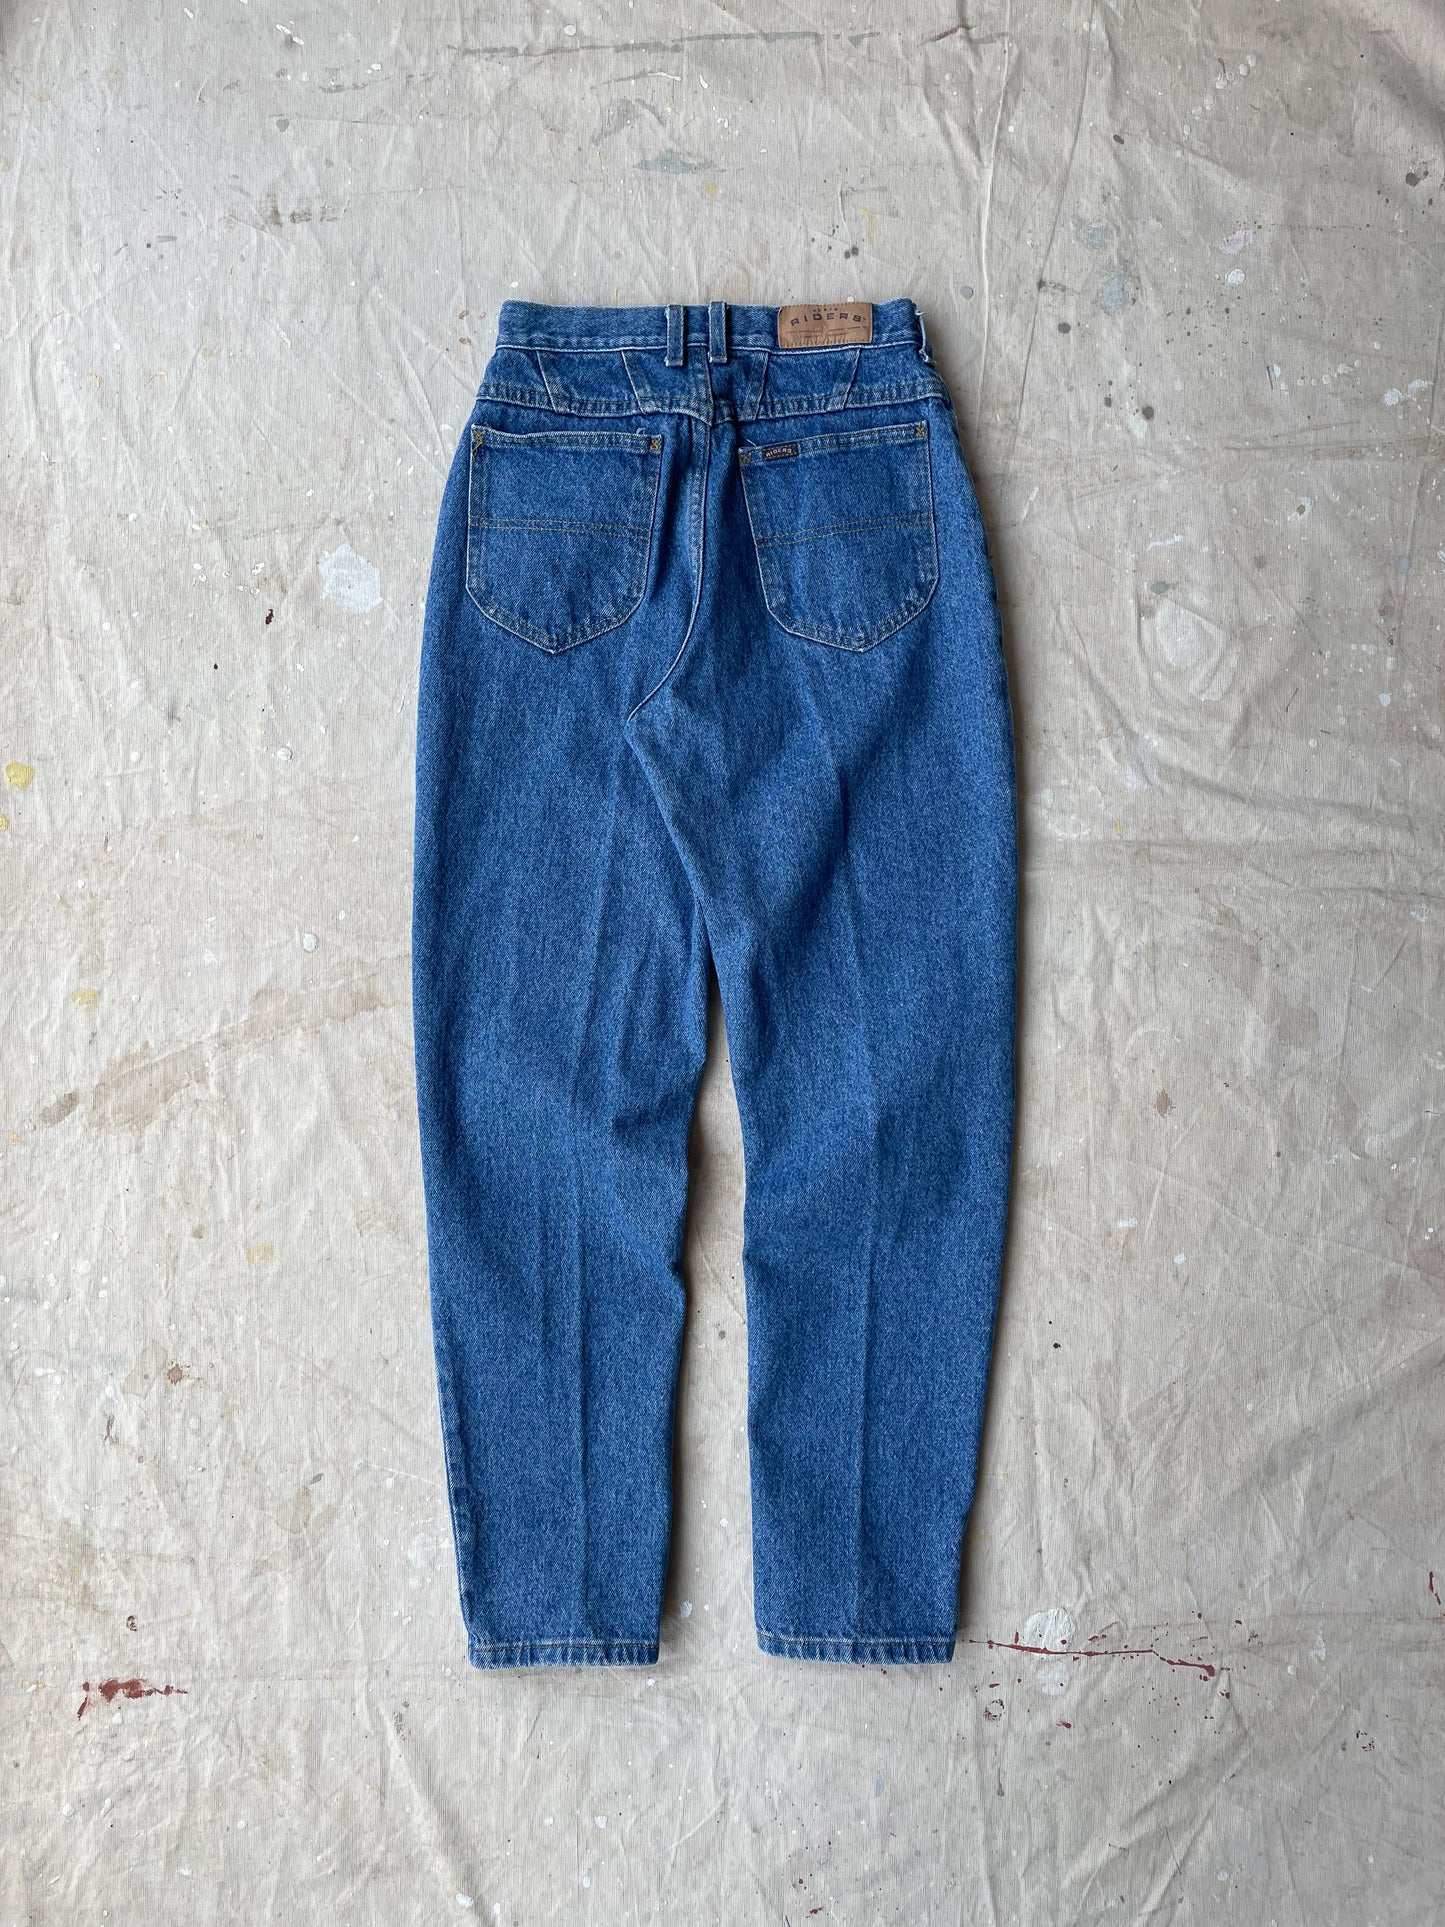 Lee Riders Jeans—[26x30]